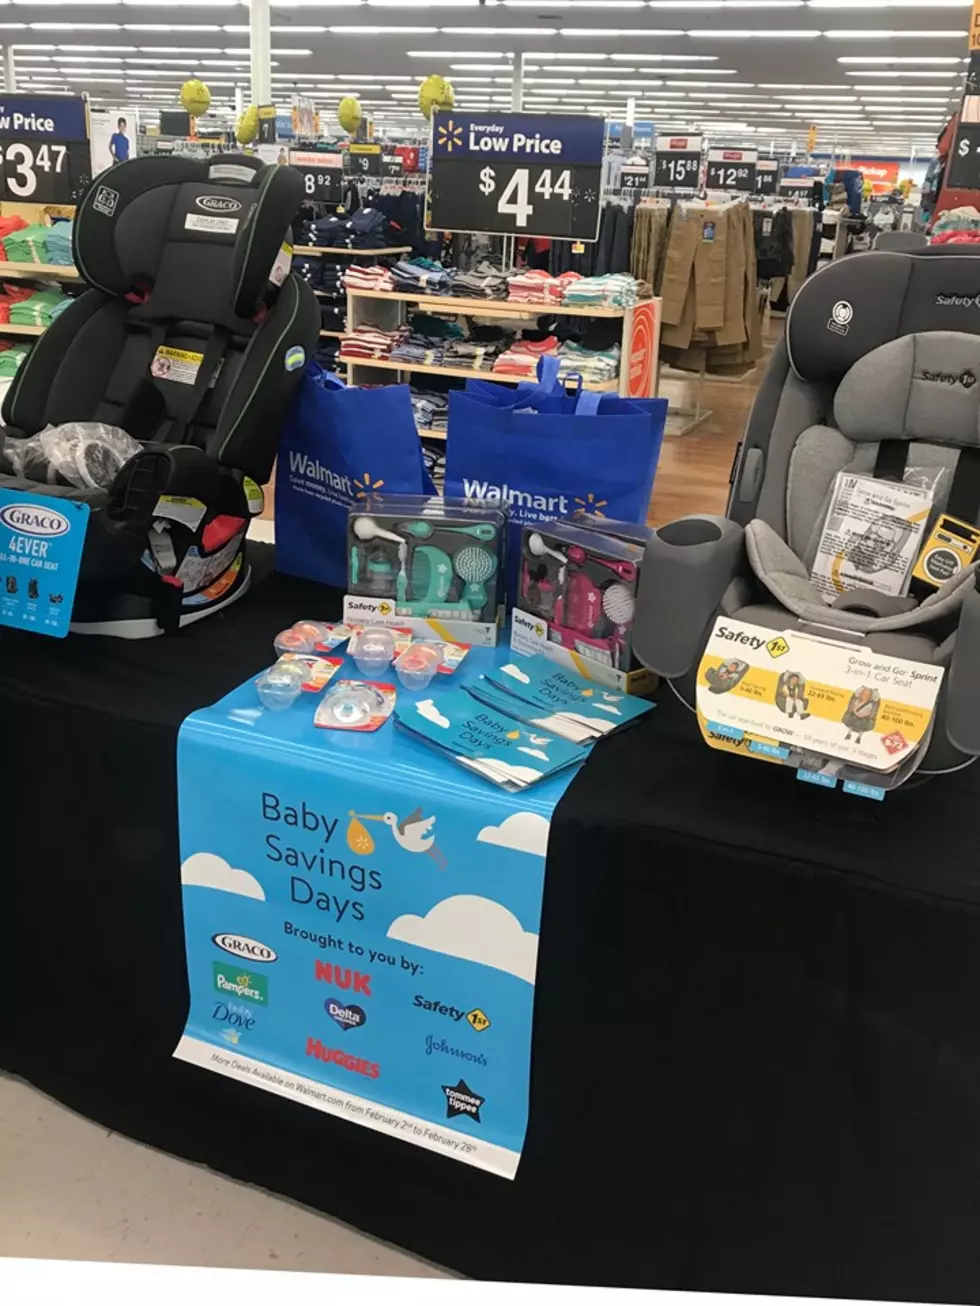 Is Walmart’s ‘Best of Baby’ Savings Event Really What It Seems?